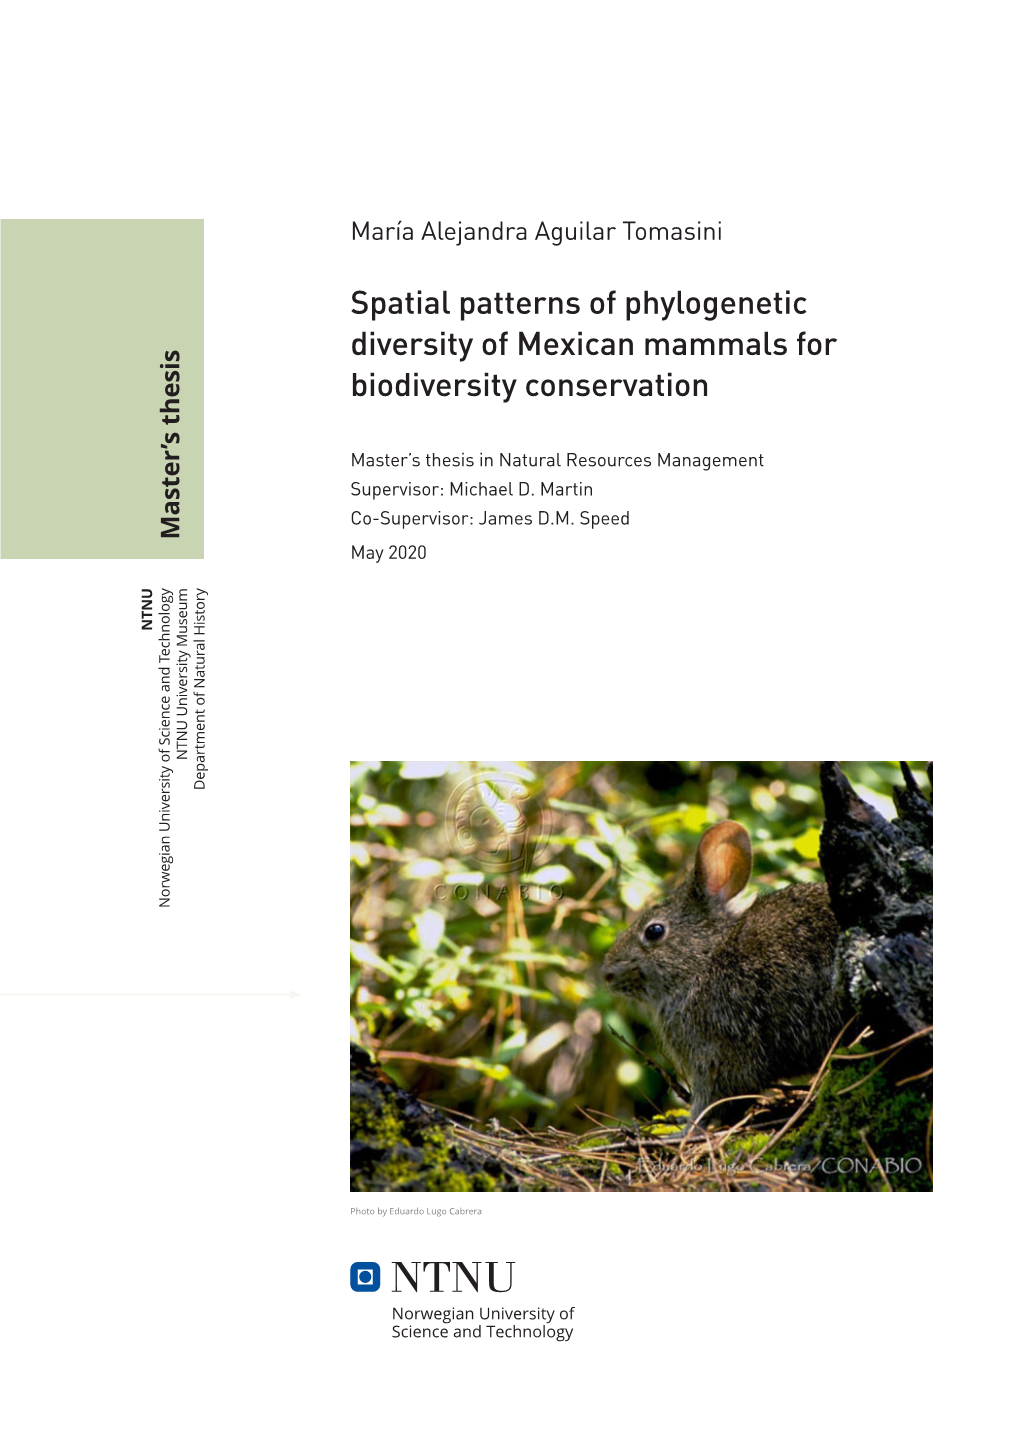 Spatial Patterns of Phylogenetic Diversity of Mexican Mammals for Biodiversity Conservation